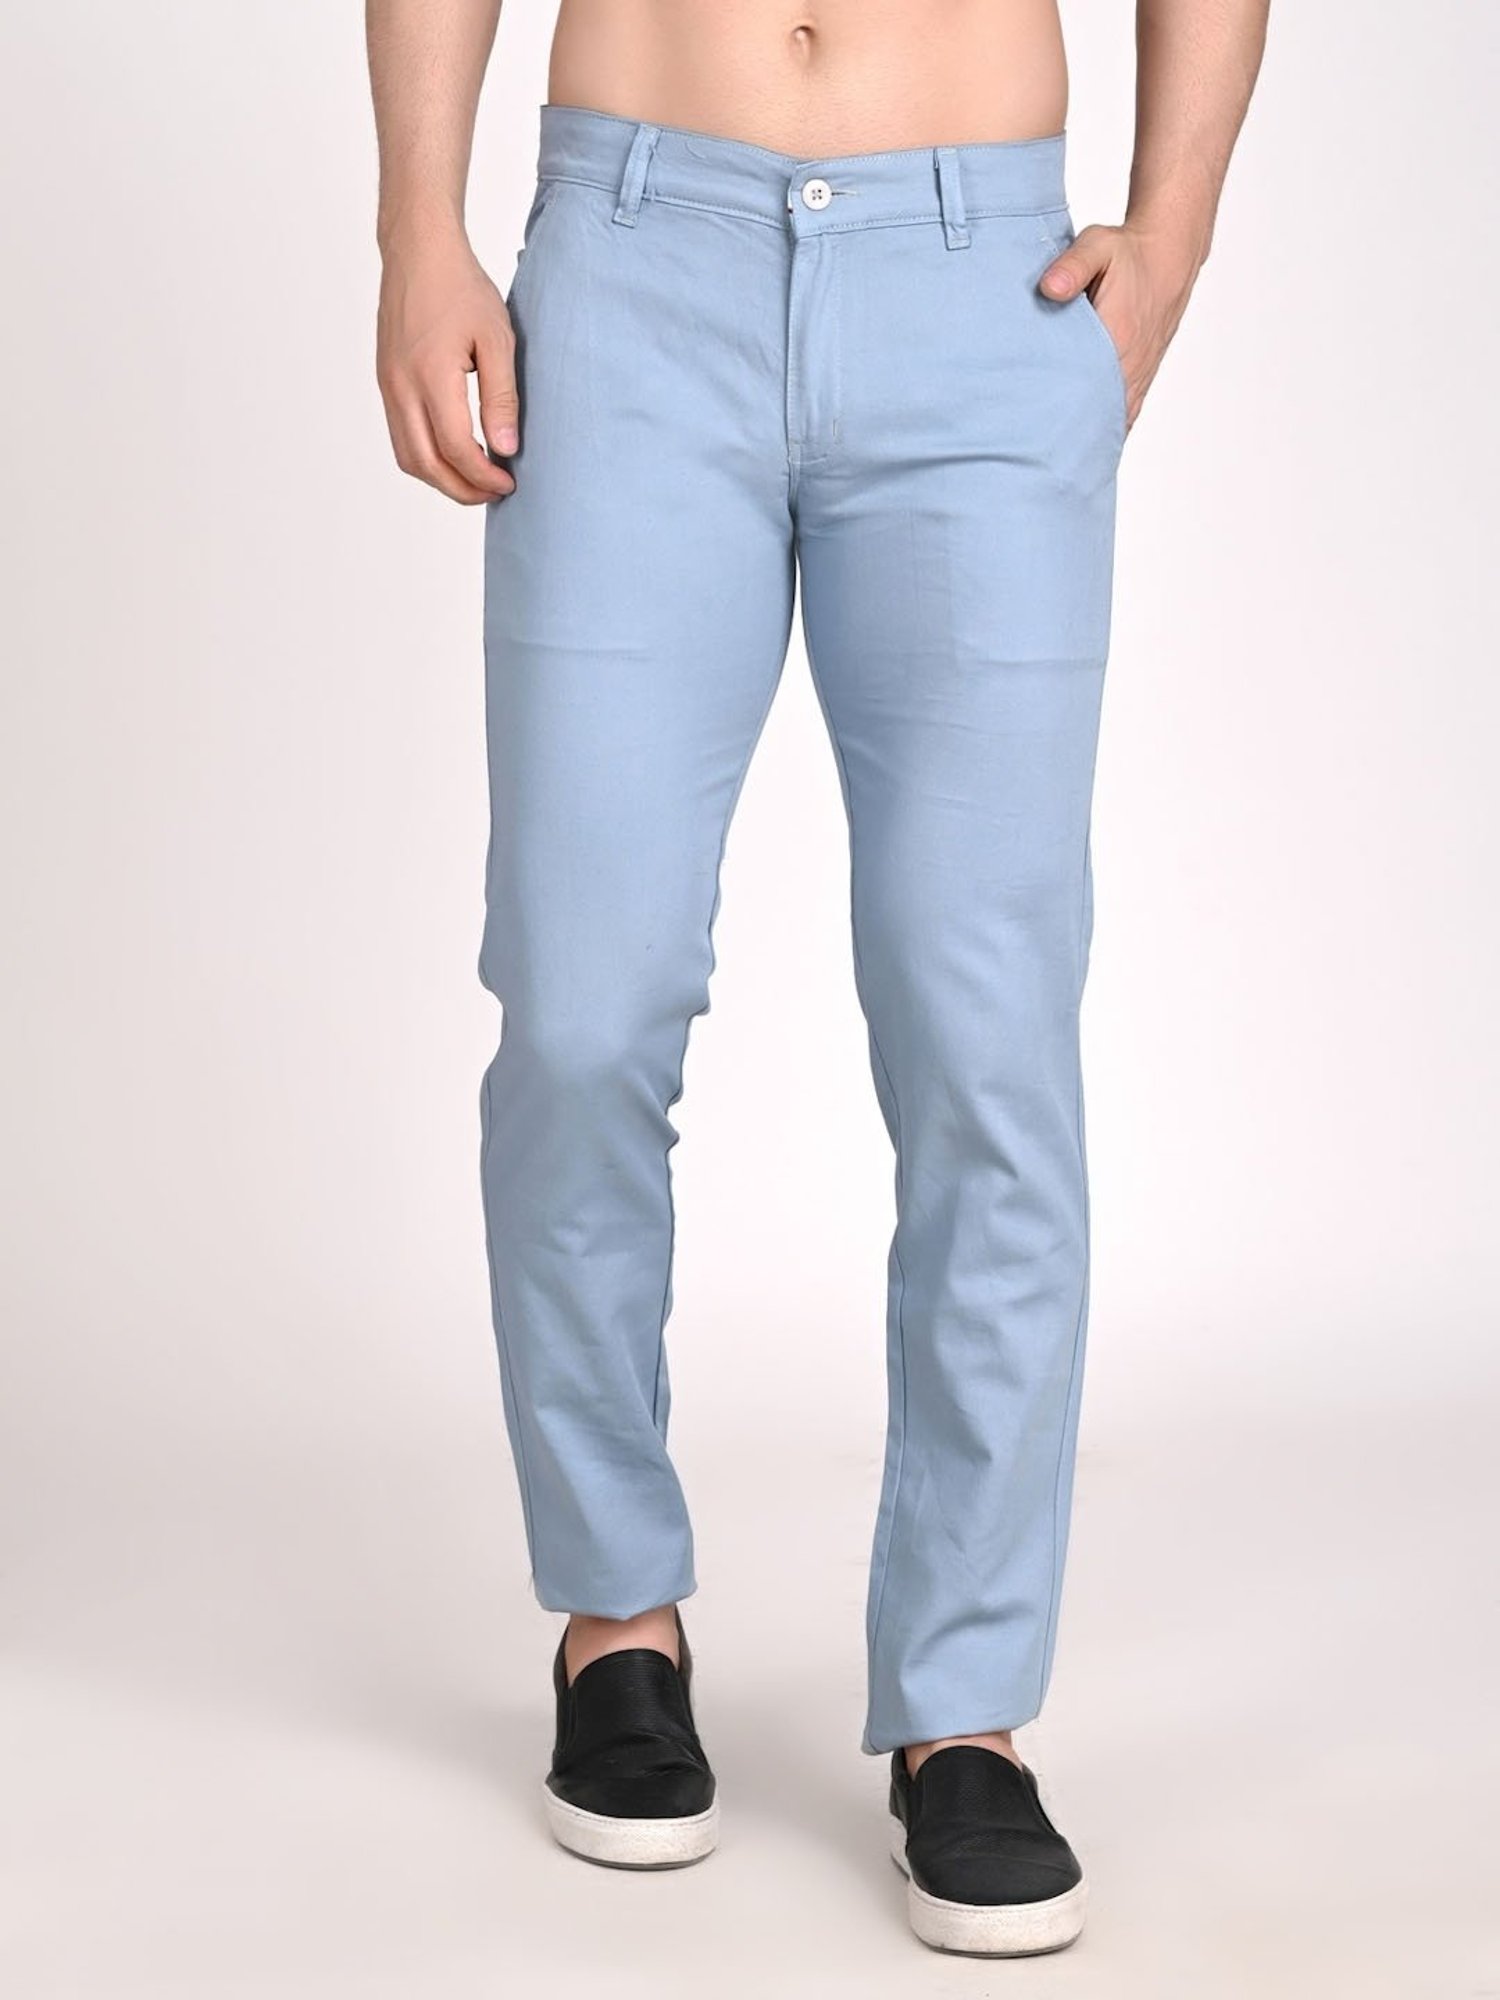 Shop Latest Mens Blue Chinos Online at Great Price